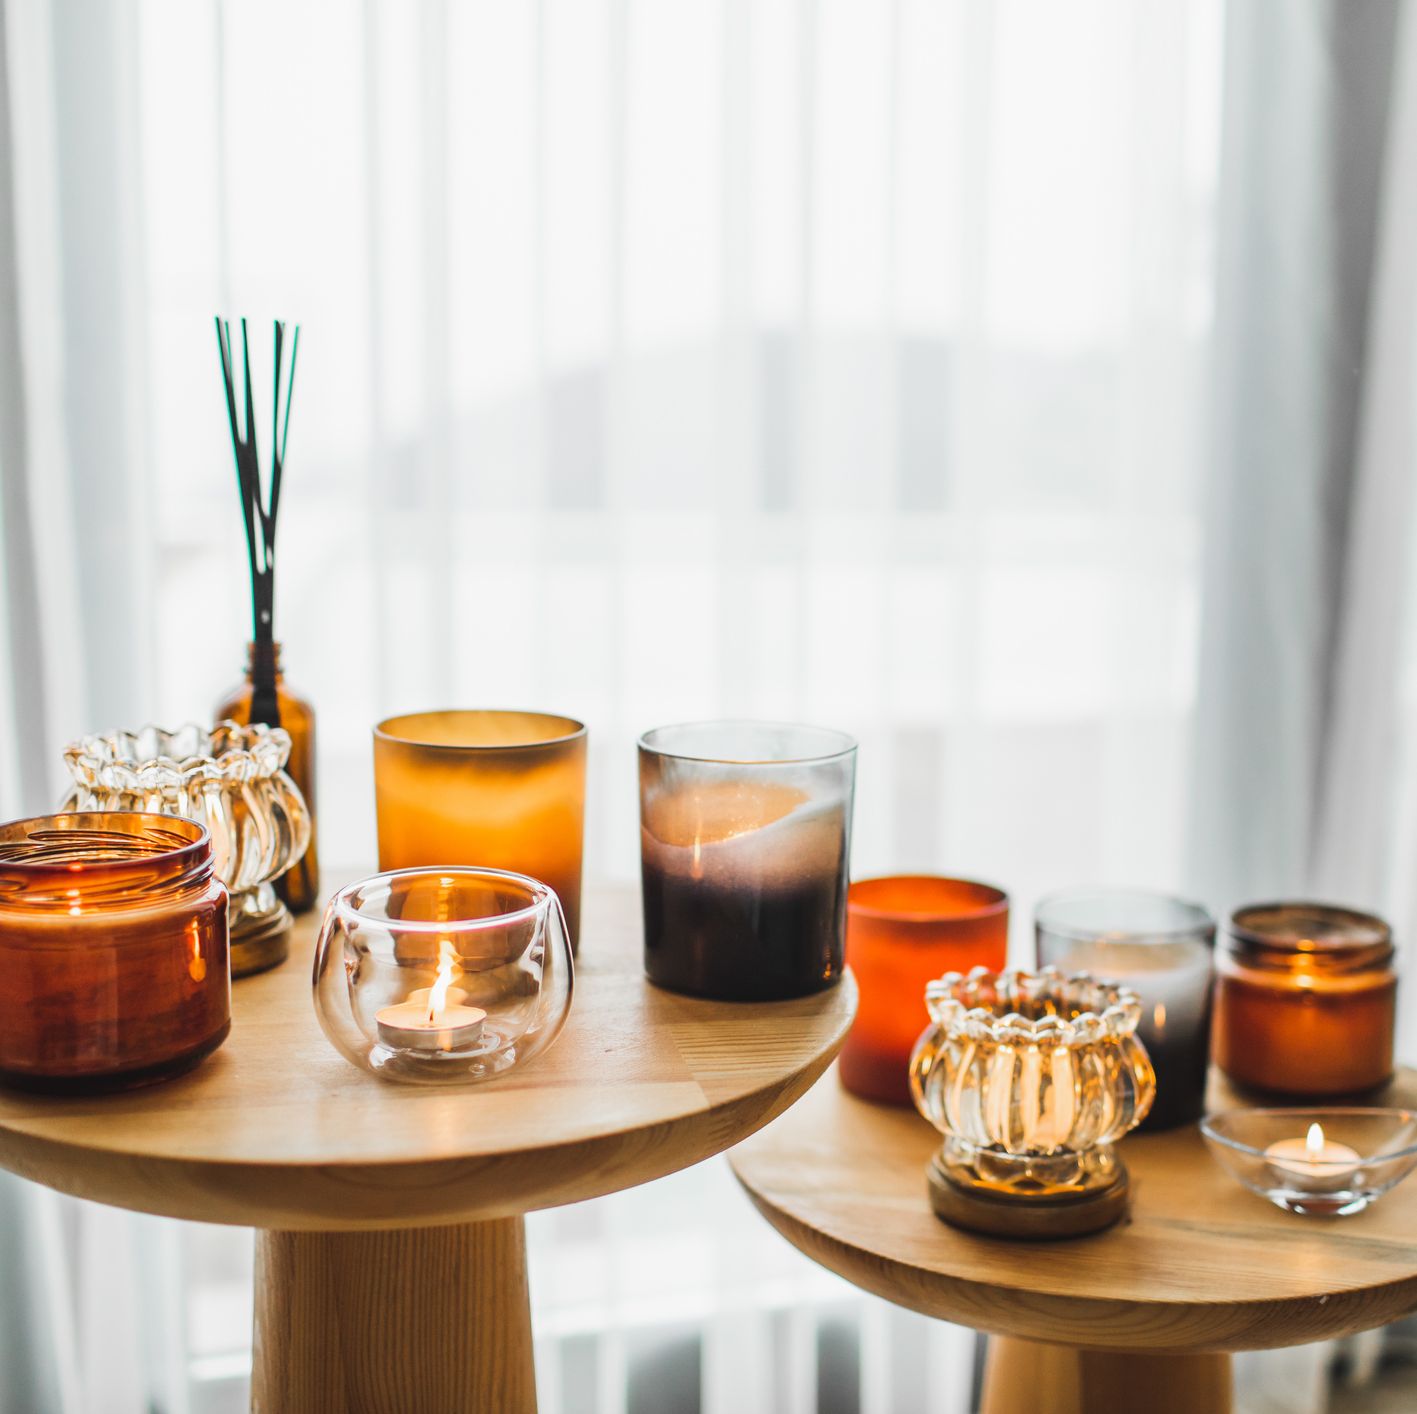 Are Candles Bad for Your Health? Experts Explain | Good Housekeeping